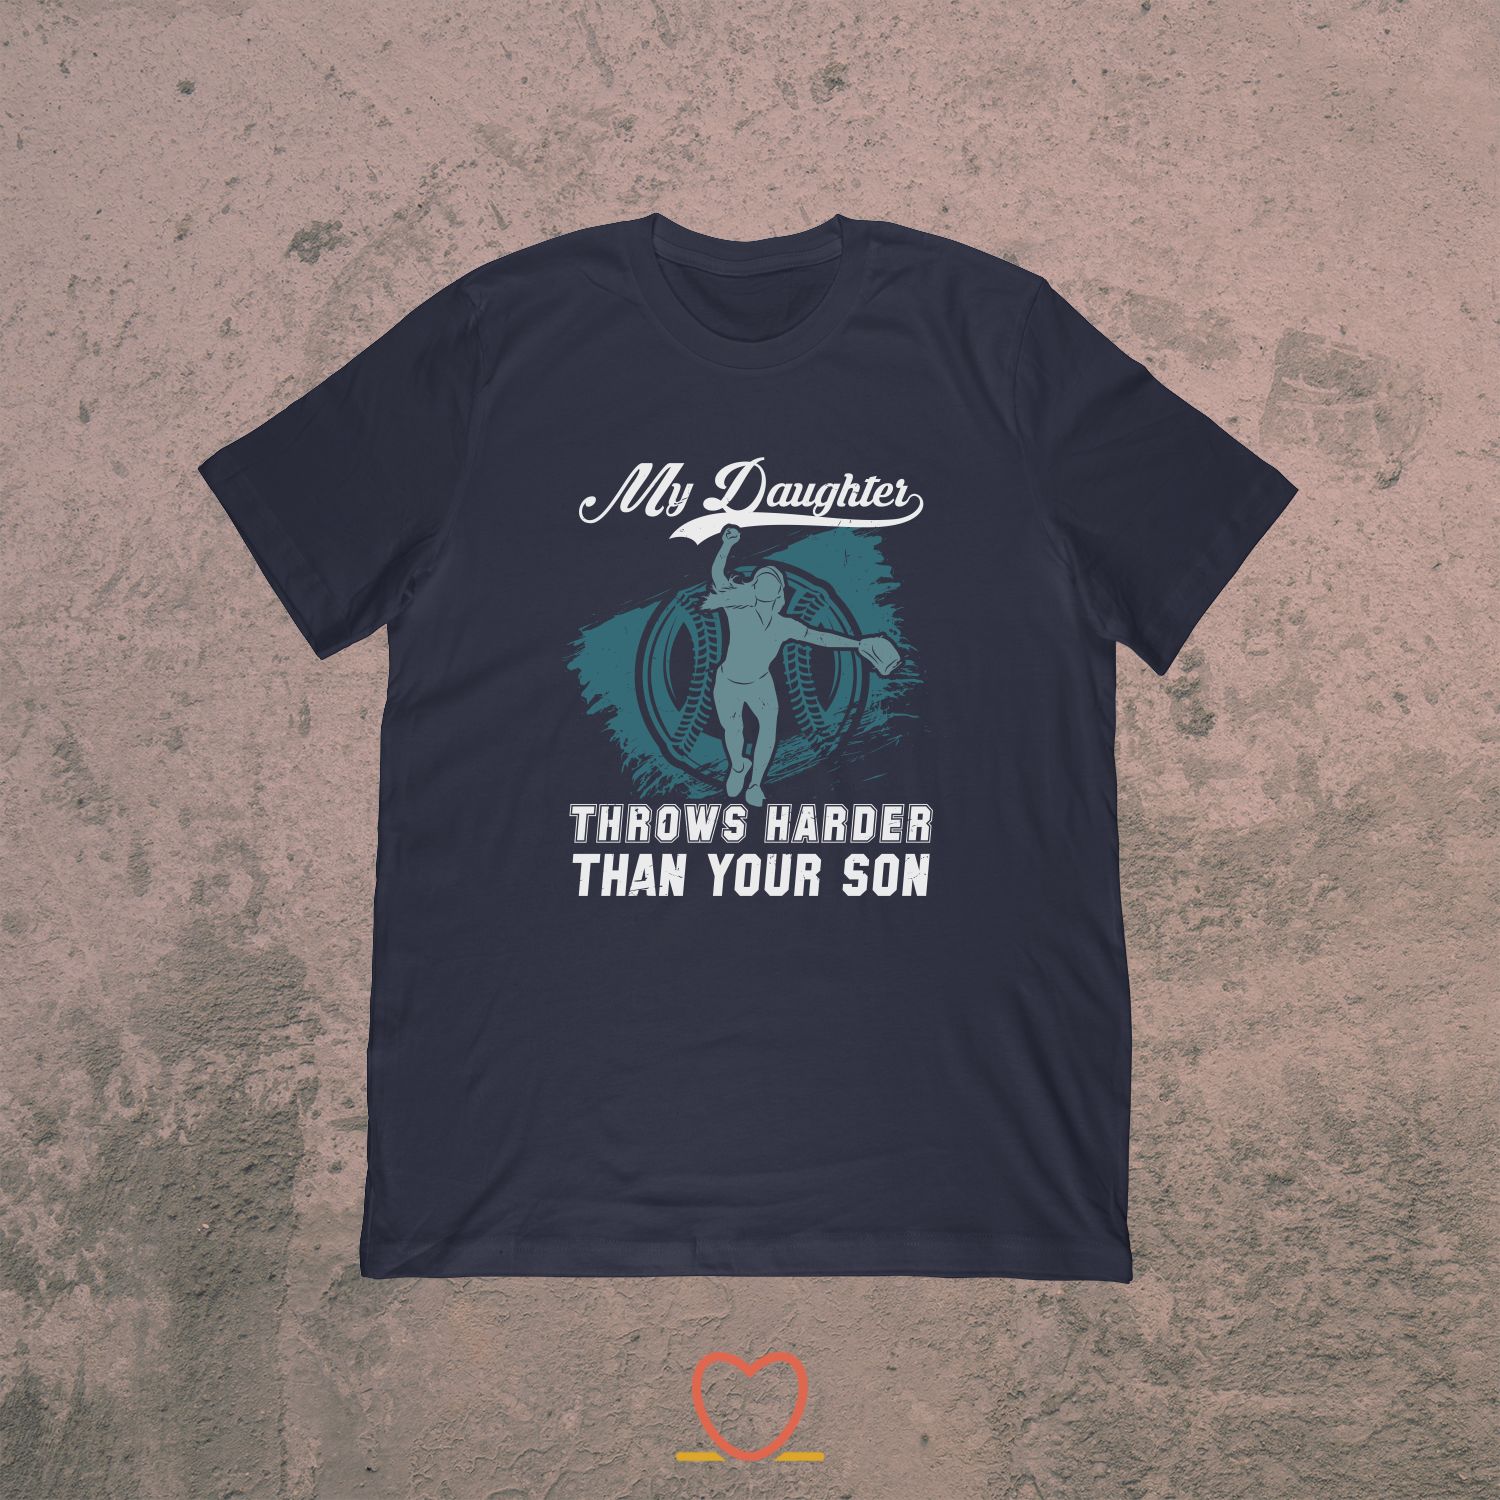 My Daughter Throws Harder Than Your Son – Funny Sports Tee